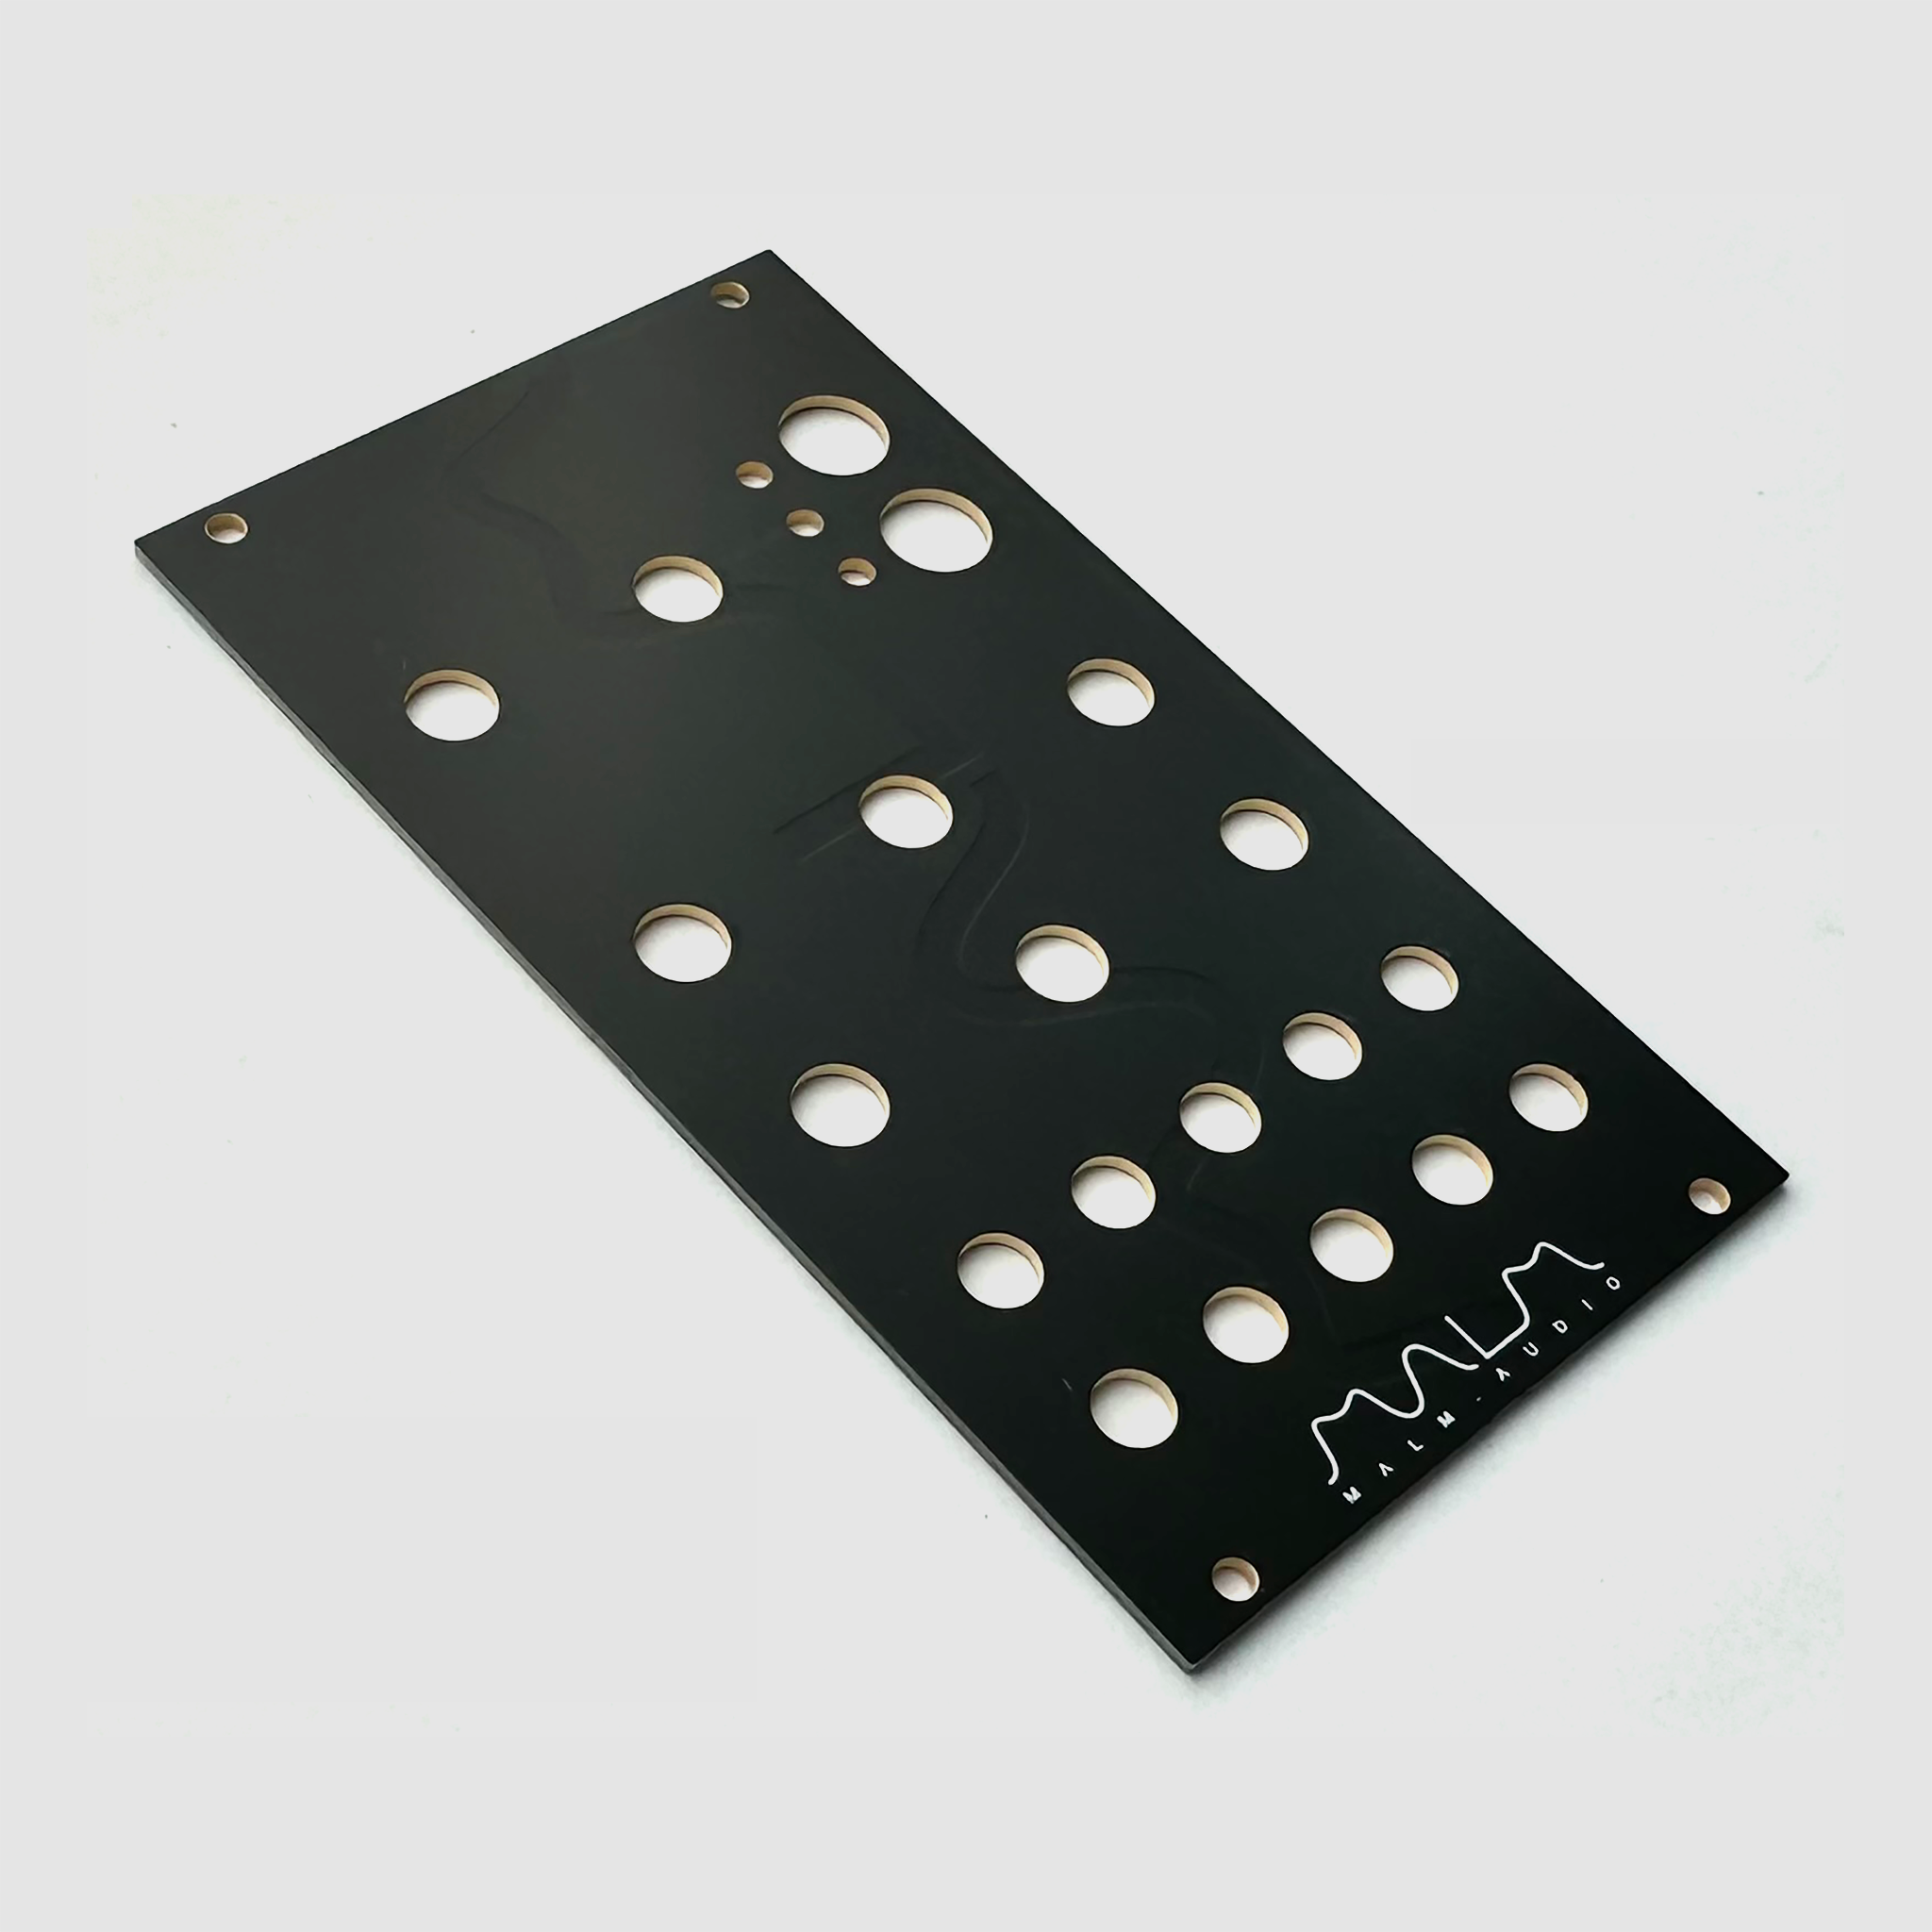 Black panel for Mutable Instruments Sheep